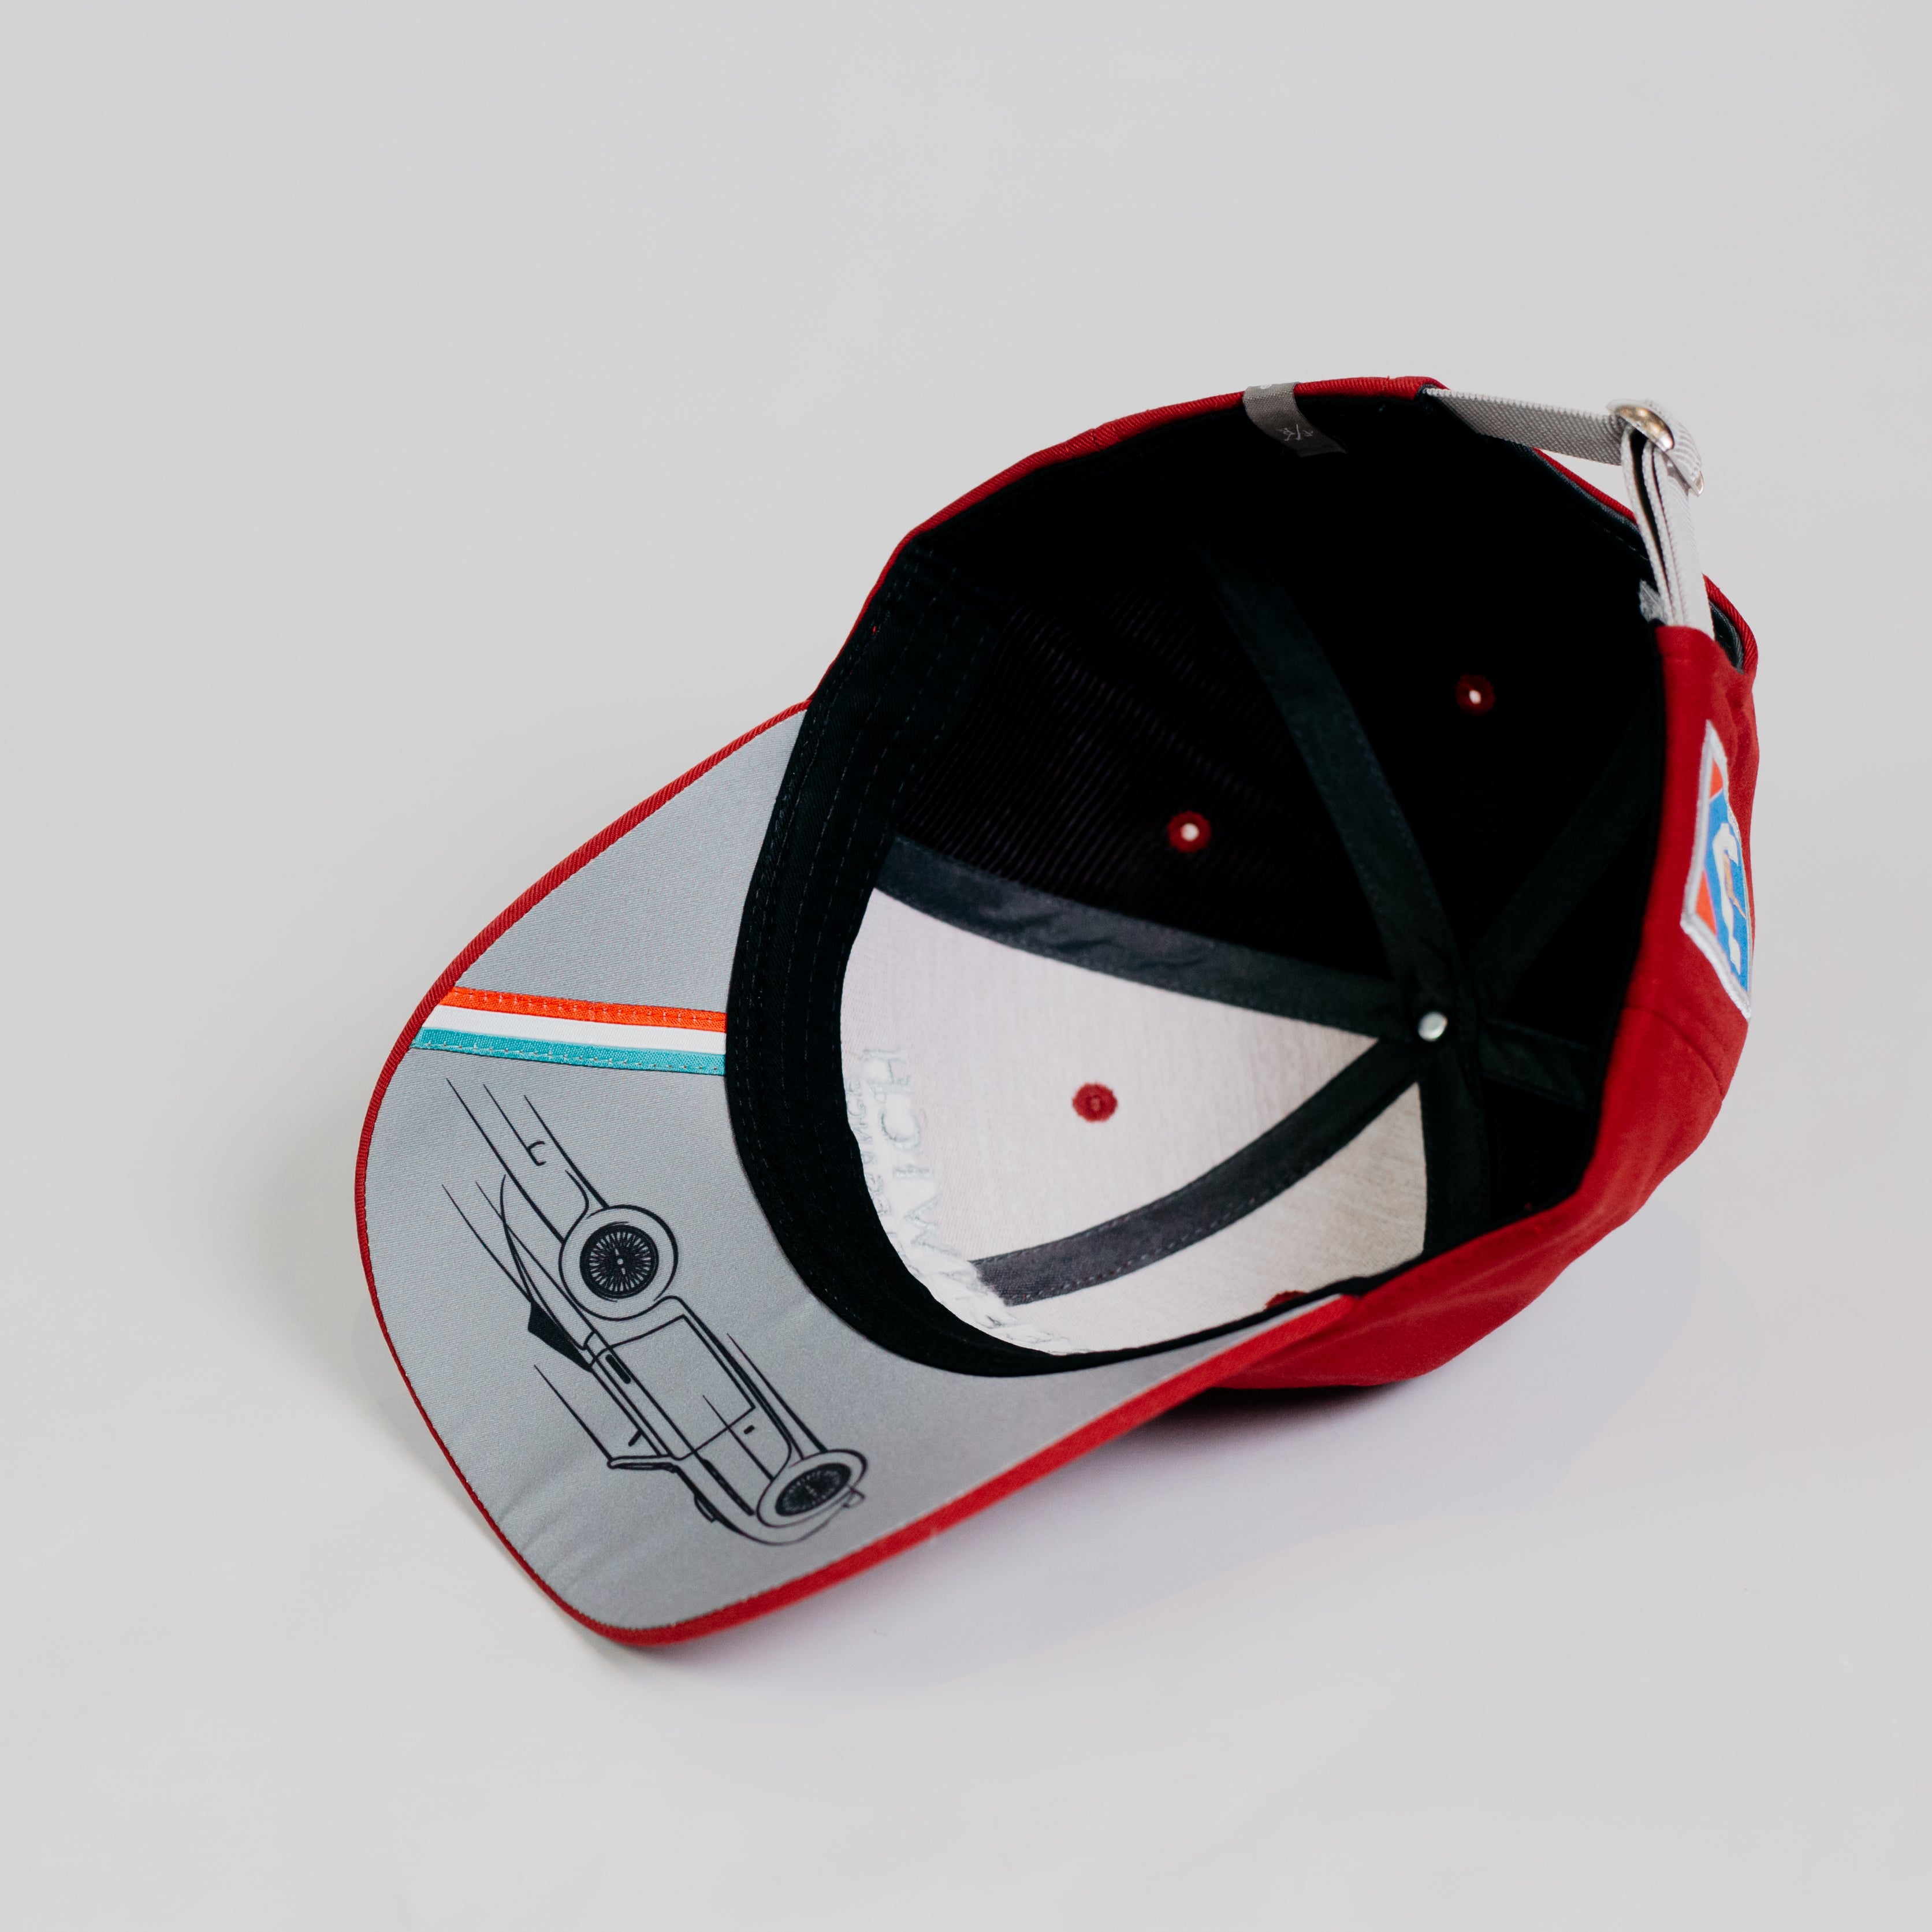 2022 Greenwich Concours Baseball Hat